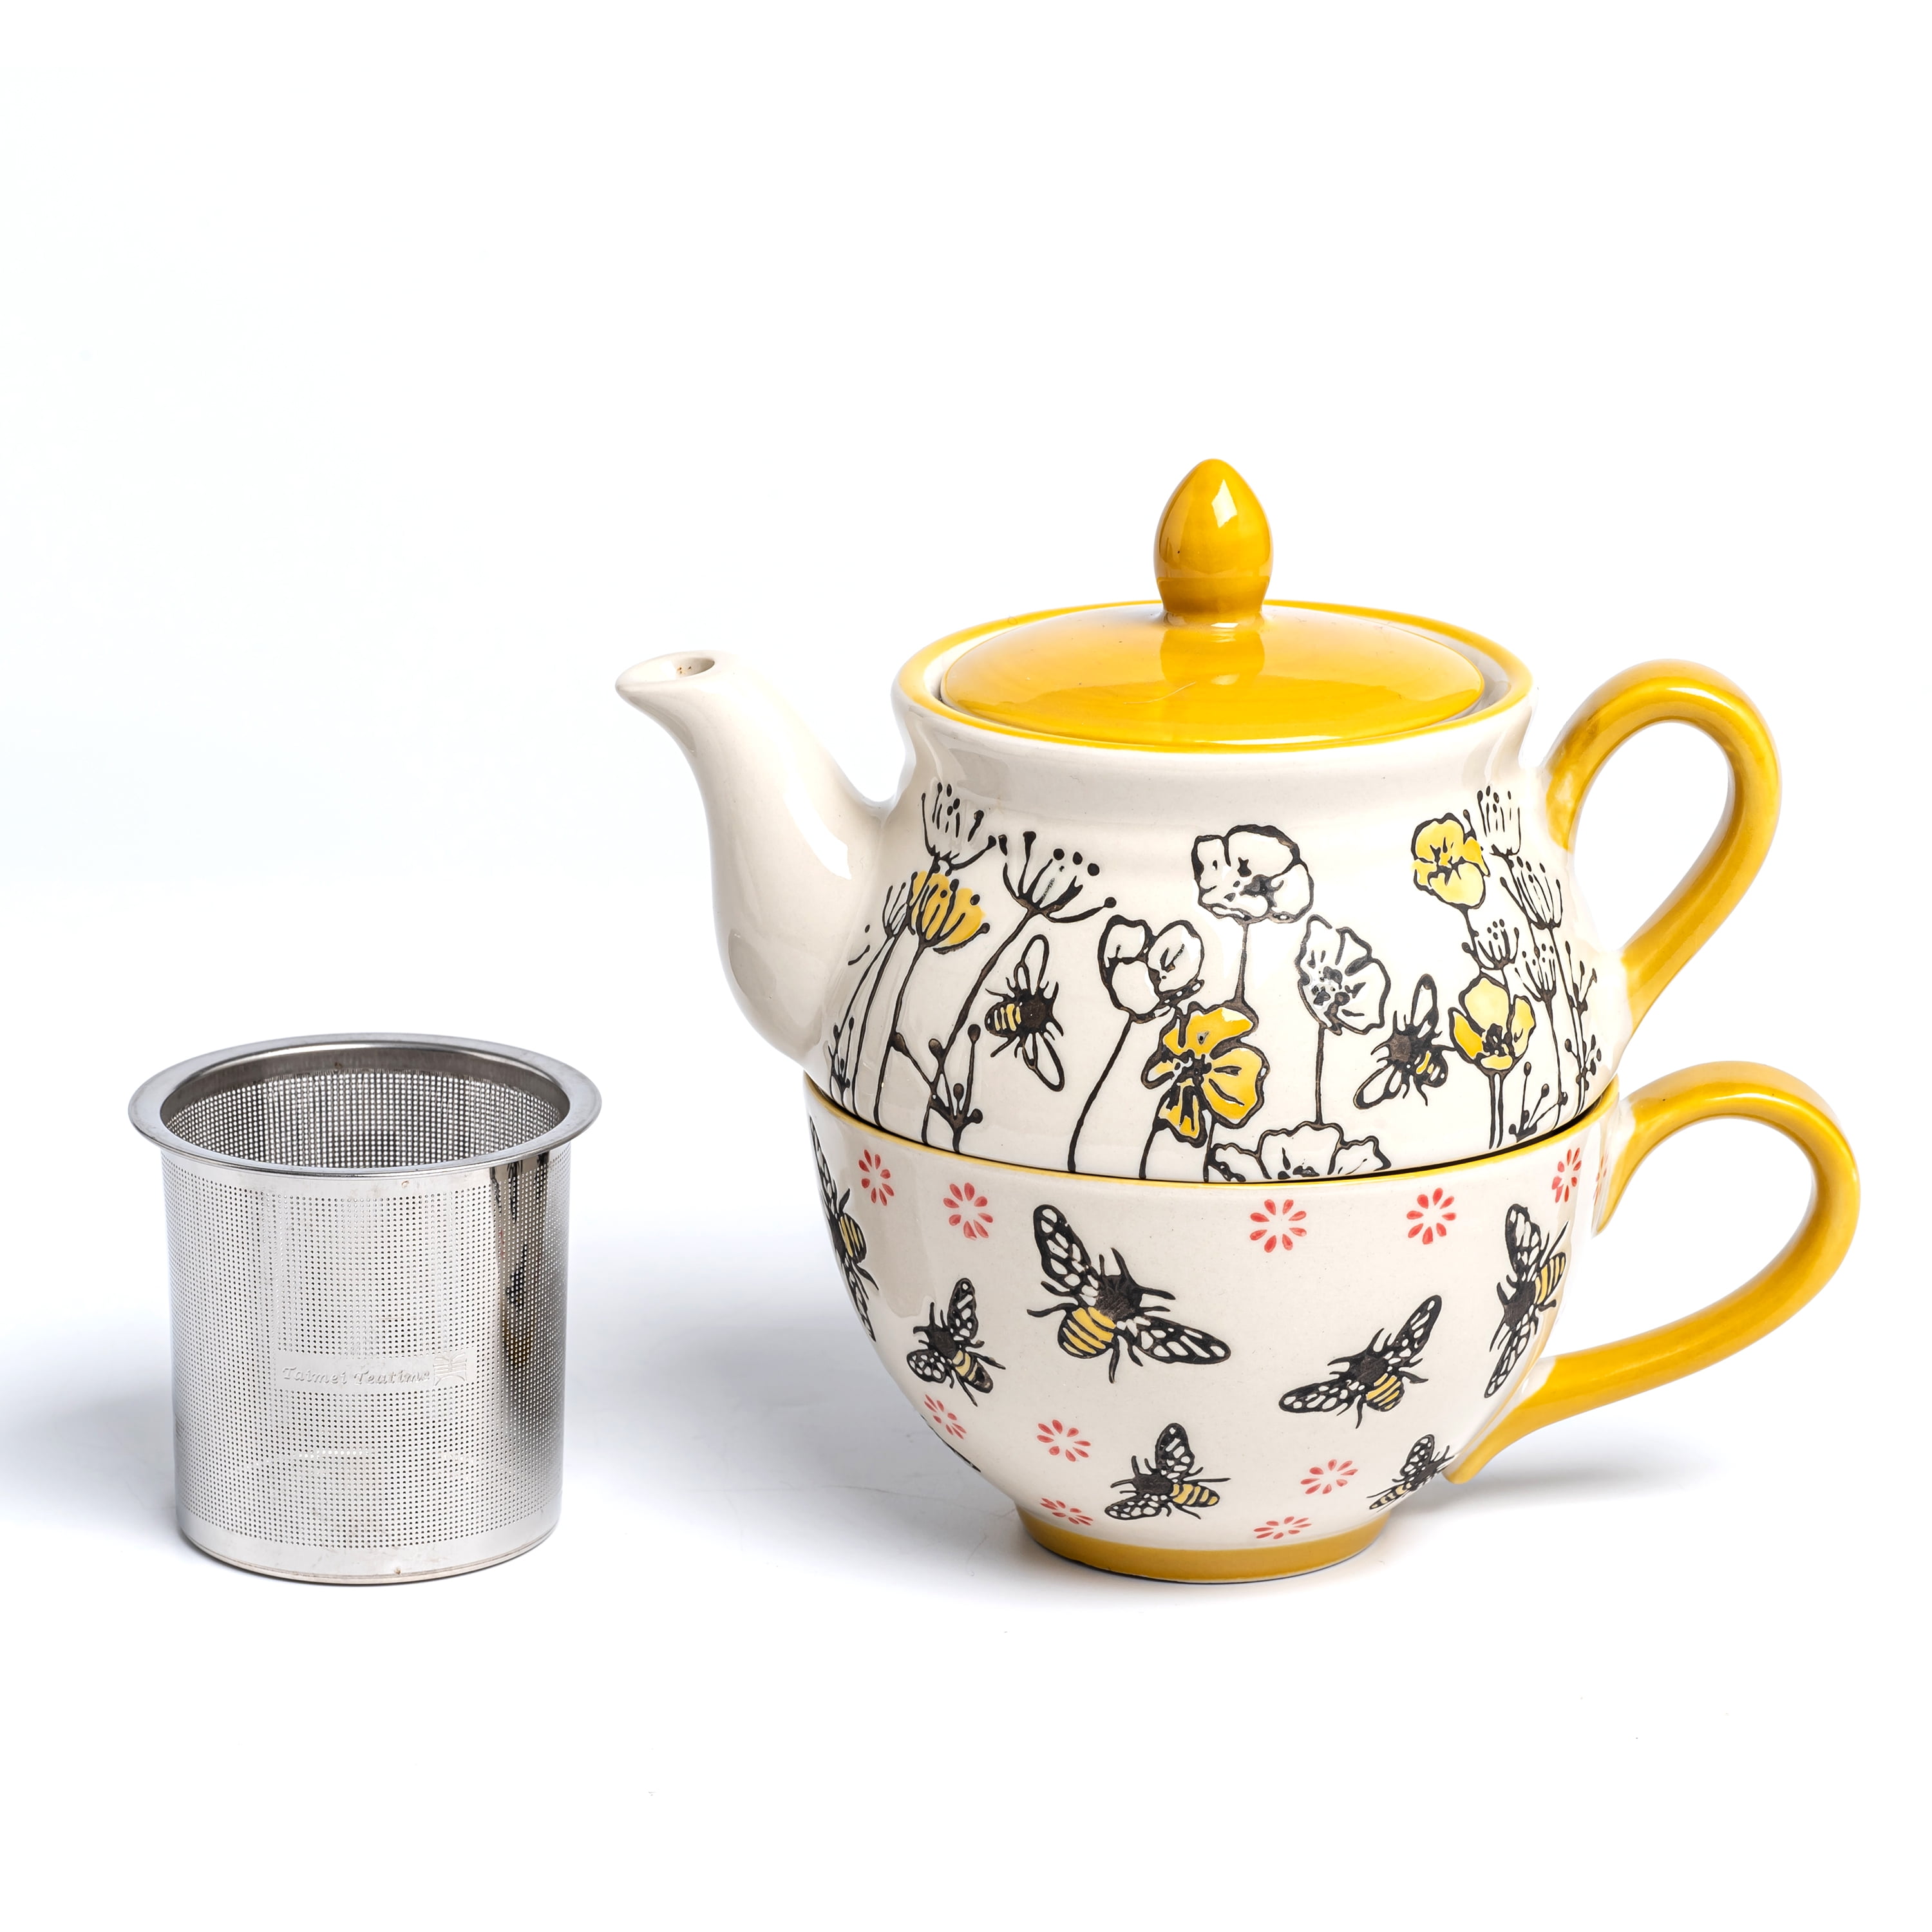 Taimei Teatime Tea Set for Adults, 15oz Teapot with Infuser and Cup Set,  Ceramic Tea for One Set with Handpainted Bee and Floral Pattern, Loose Leaf  Tea Maker Set 